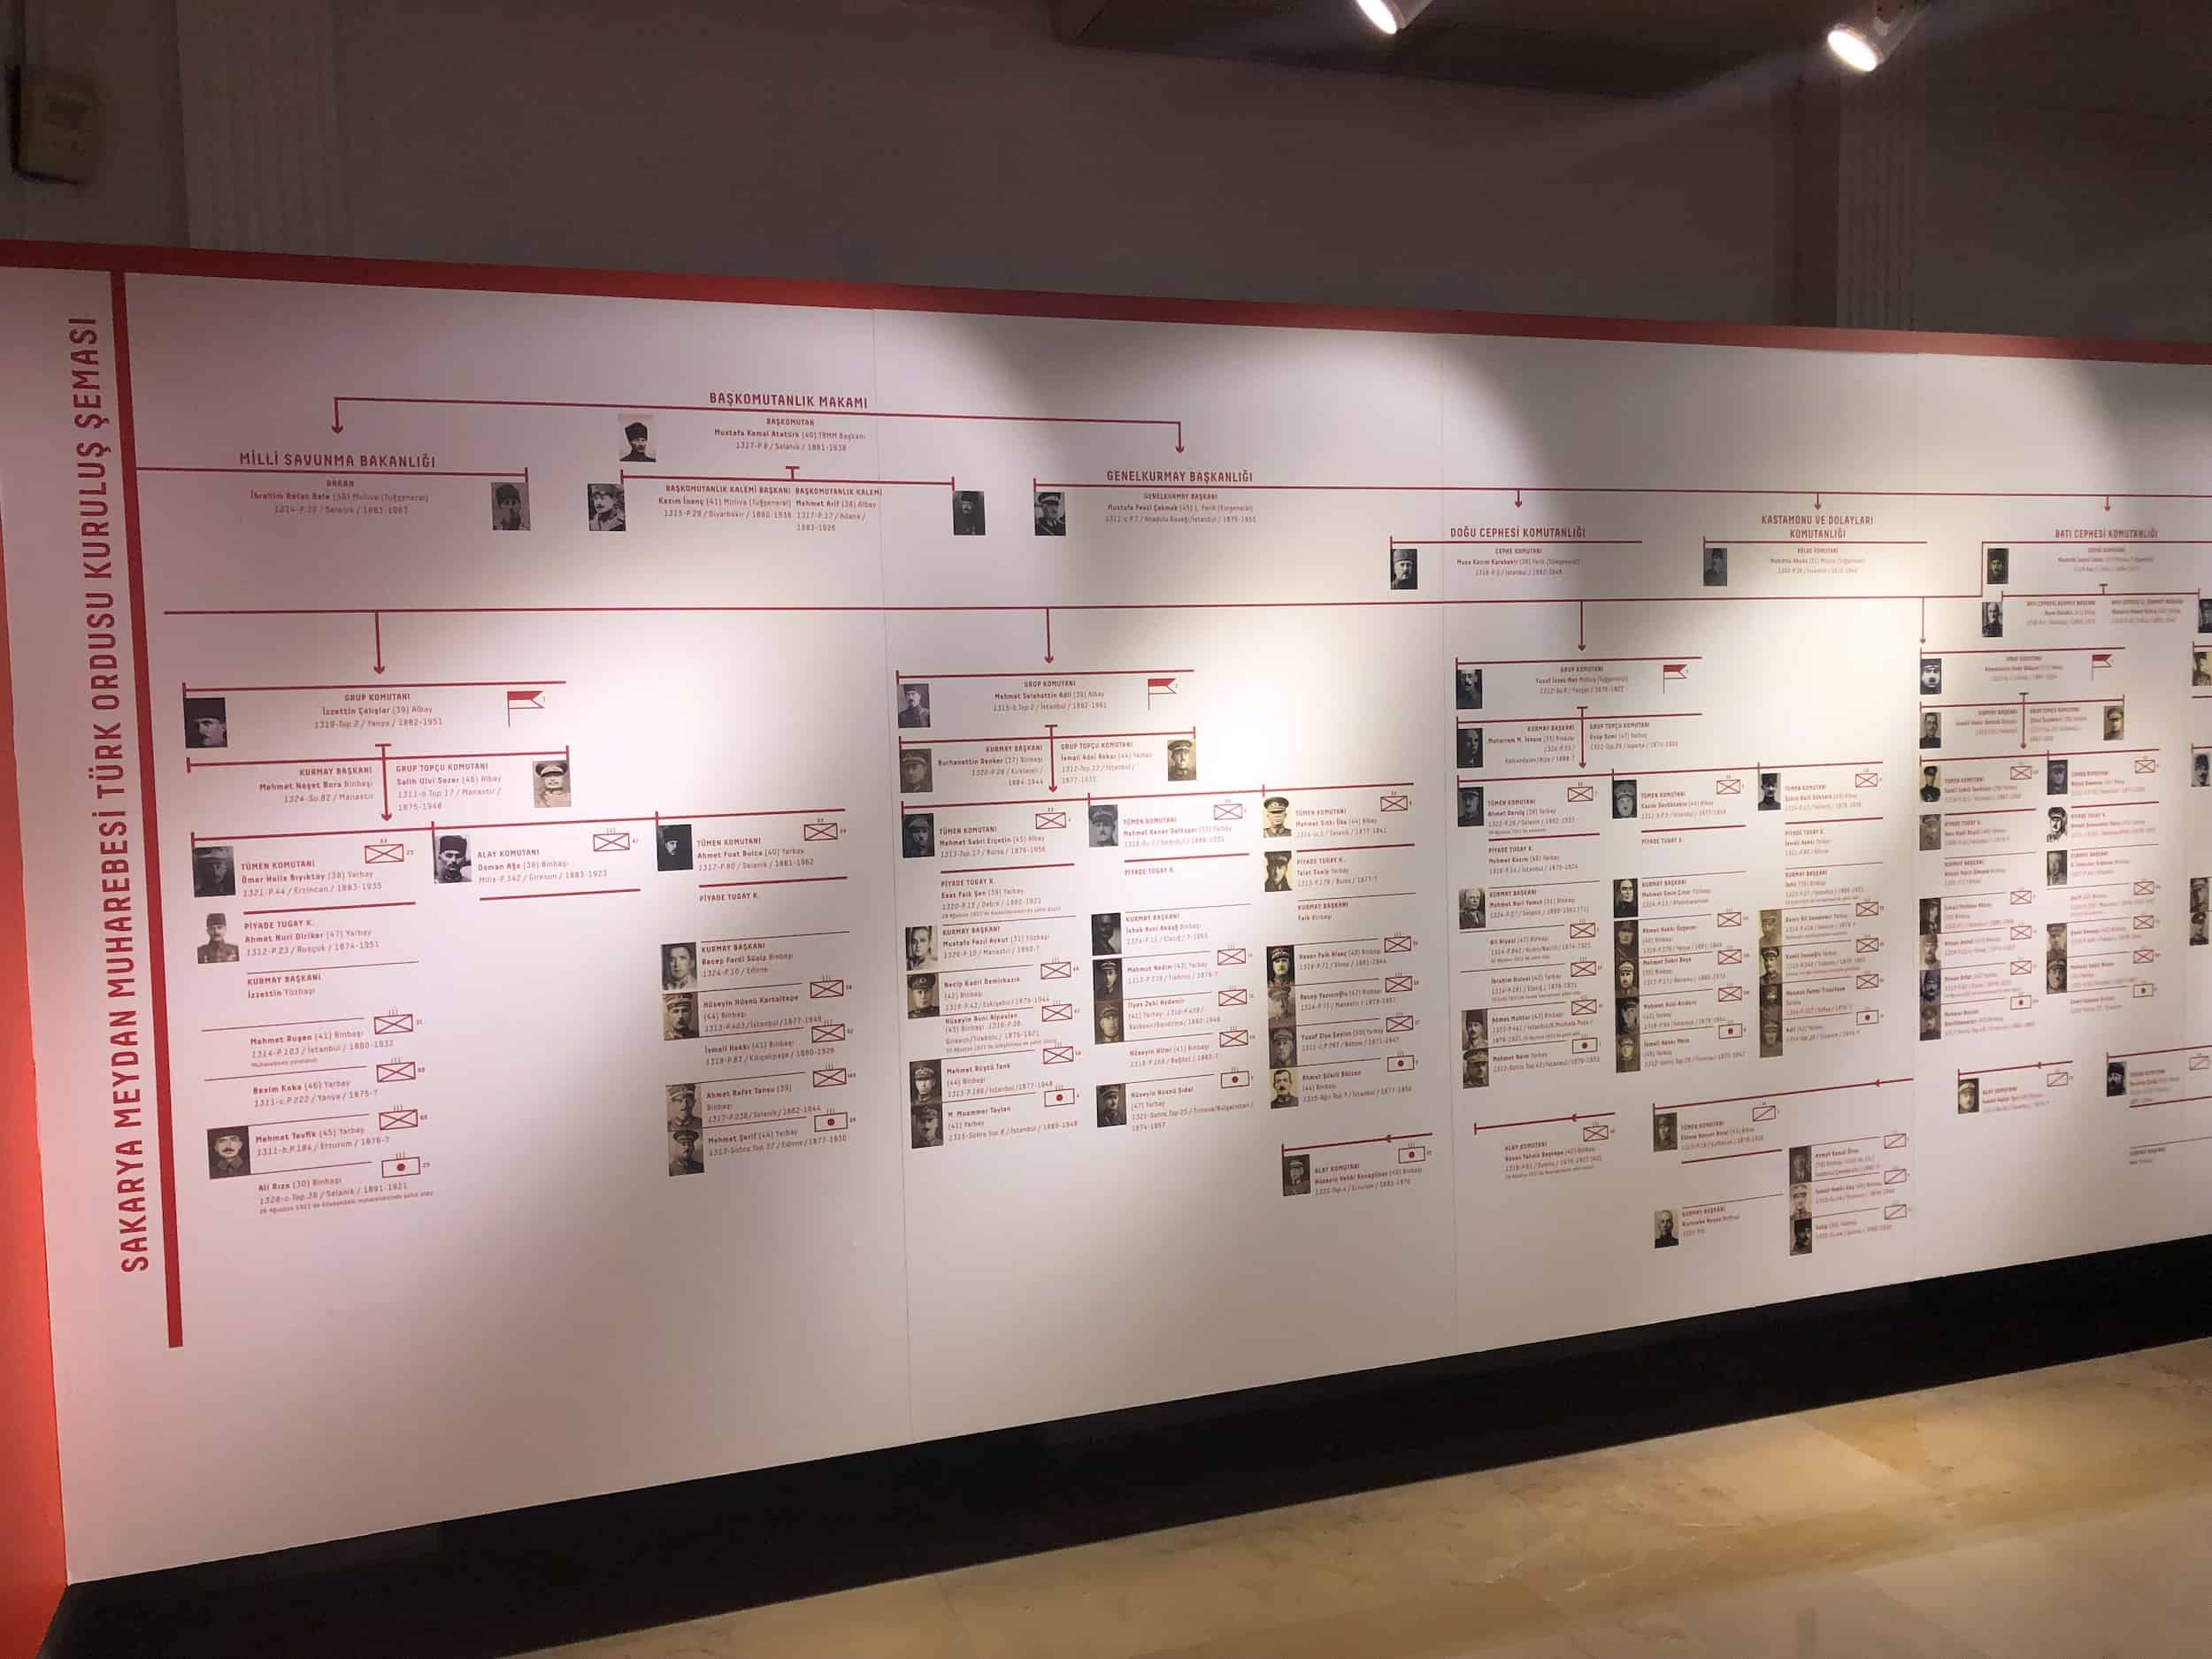 Hierarchy chart of the Turkish Army in the Battle of Sakarya exhibition